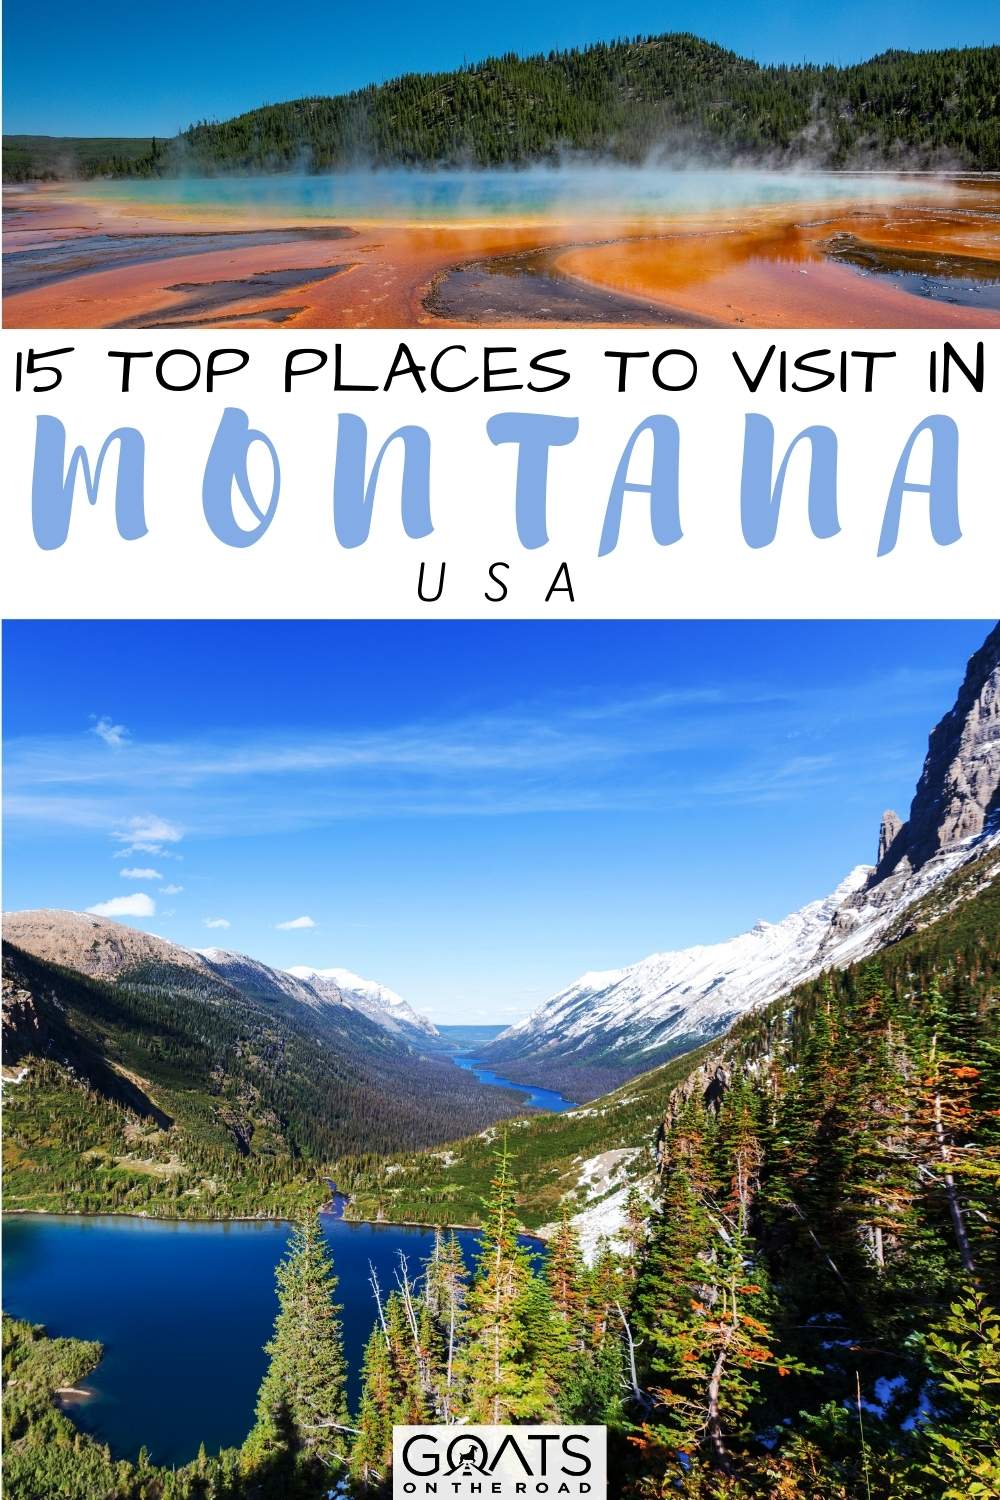 “15 Top Places To Visit in Montana, USA